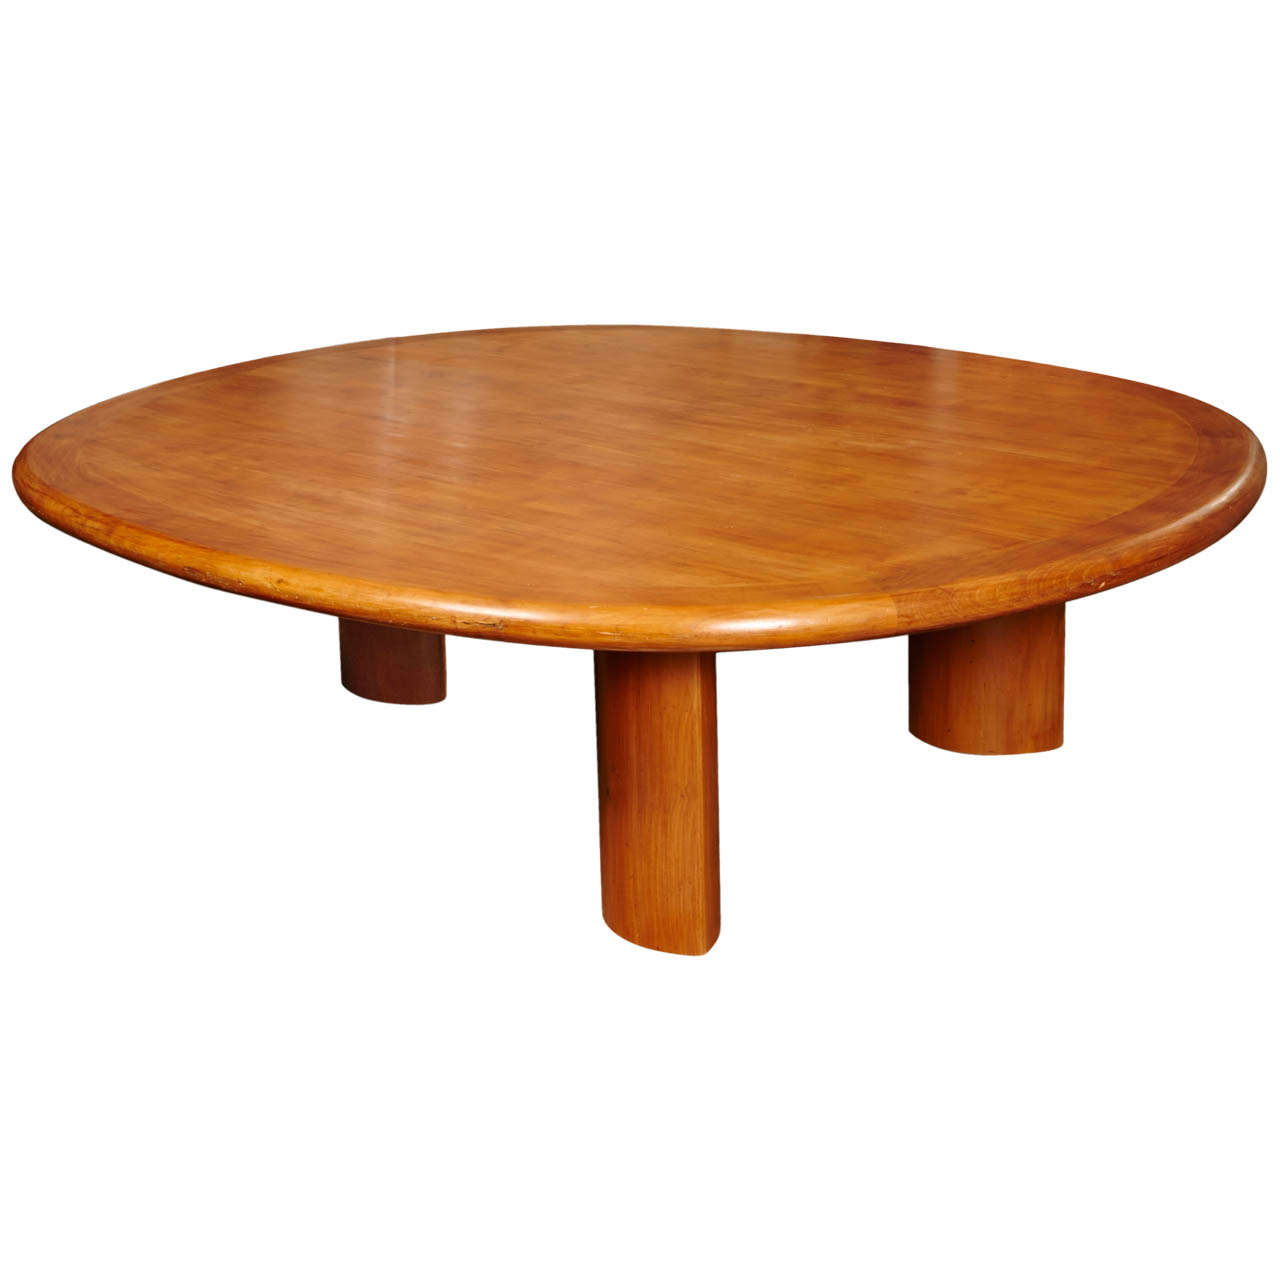 Large Coffee Table in Massive Cherry Wood, France circa 1960